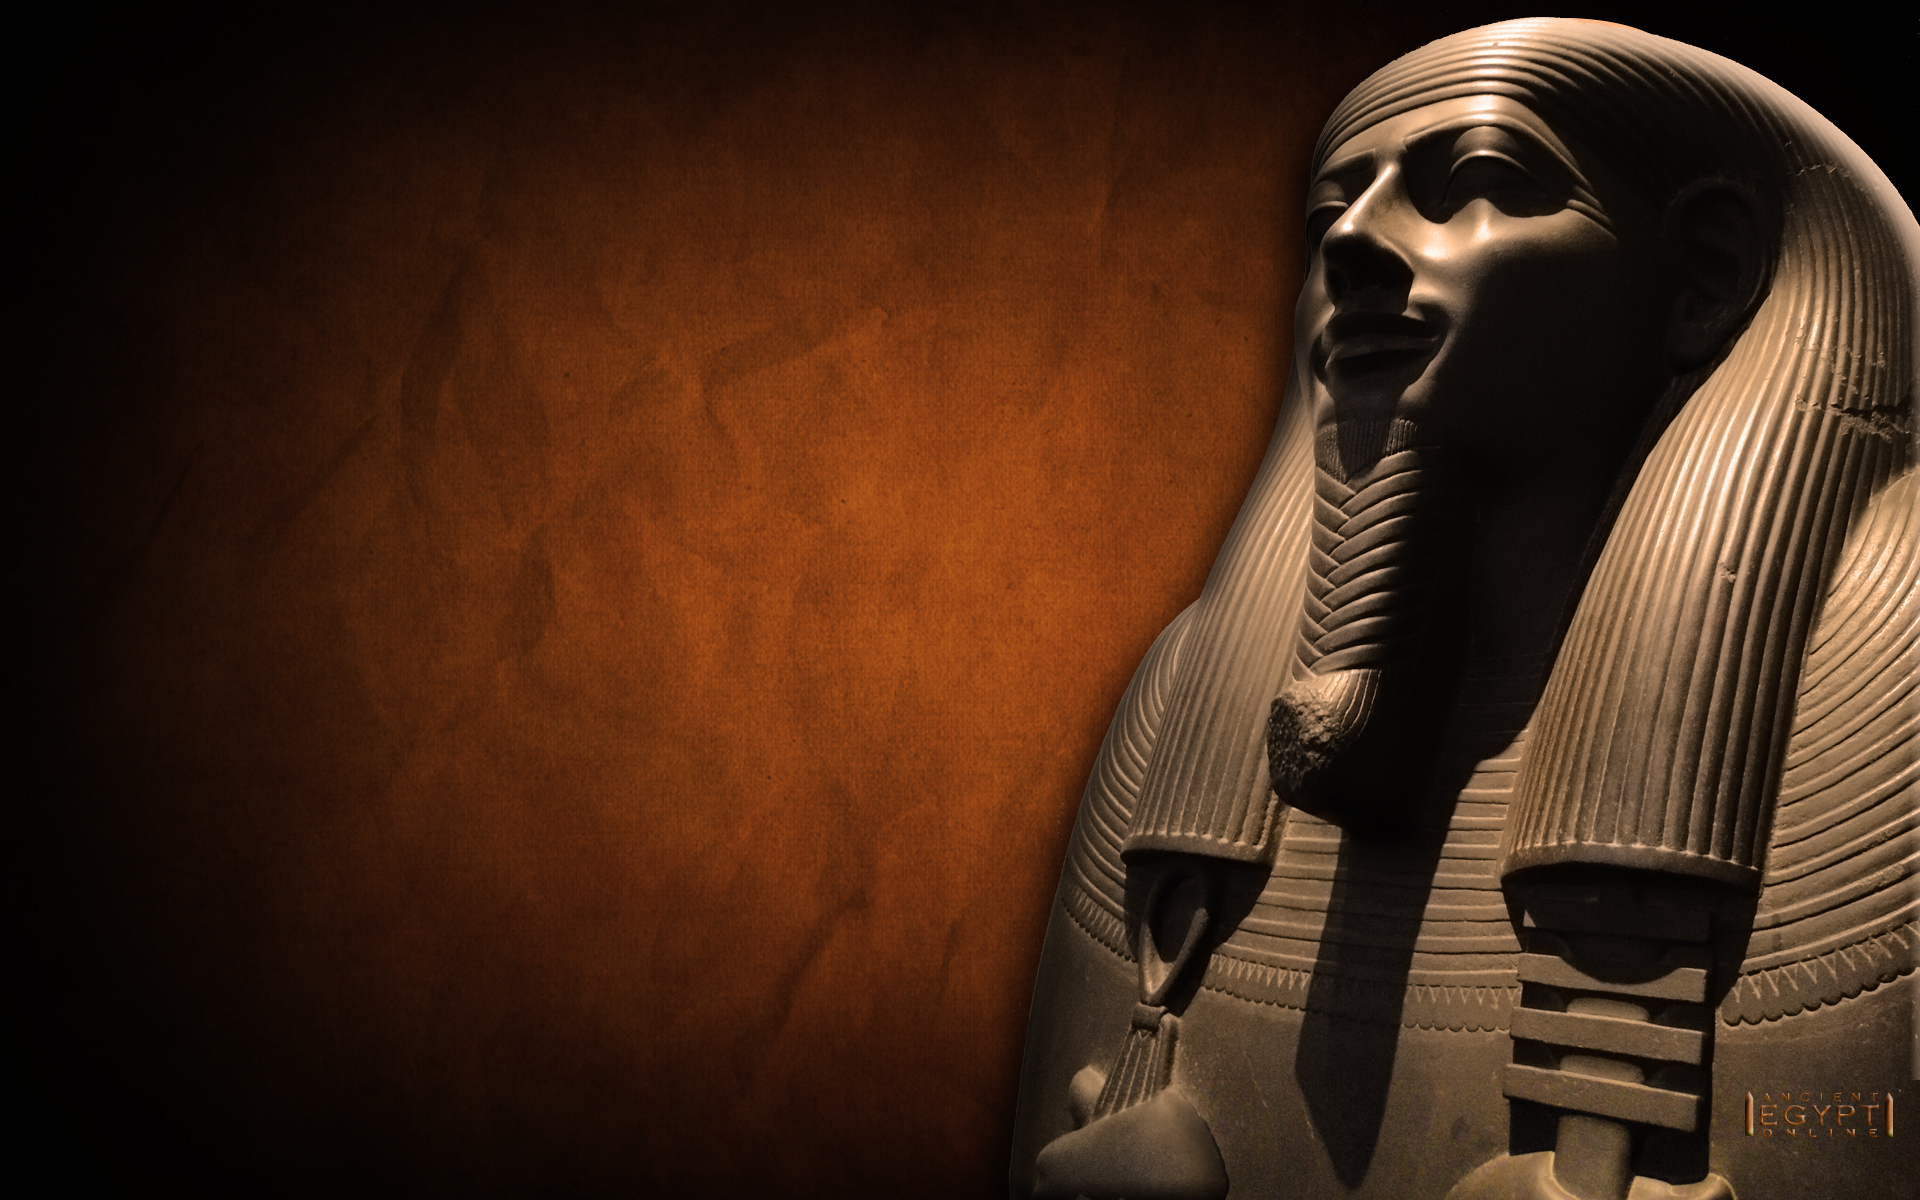 Free Download Ancient Egypt Online Aeo Wallpaper Gallery 19x10 For Your Desktop Mobile Tablet Explore 74 Ancient Egypt Wallpaper Egyptian Wallpaper For Home Egyptian Wallpaper For Walls Egyptian Gods Wallpaper Backgrounds